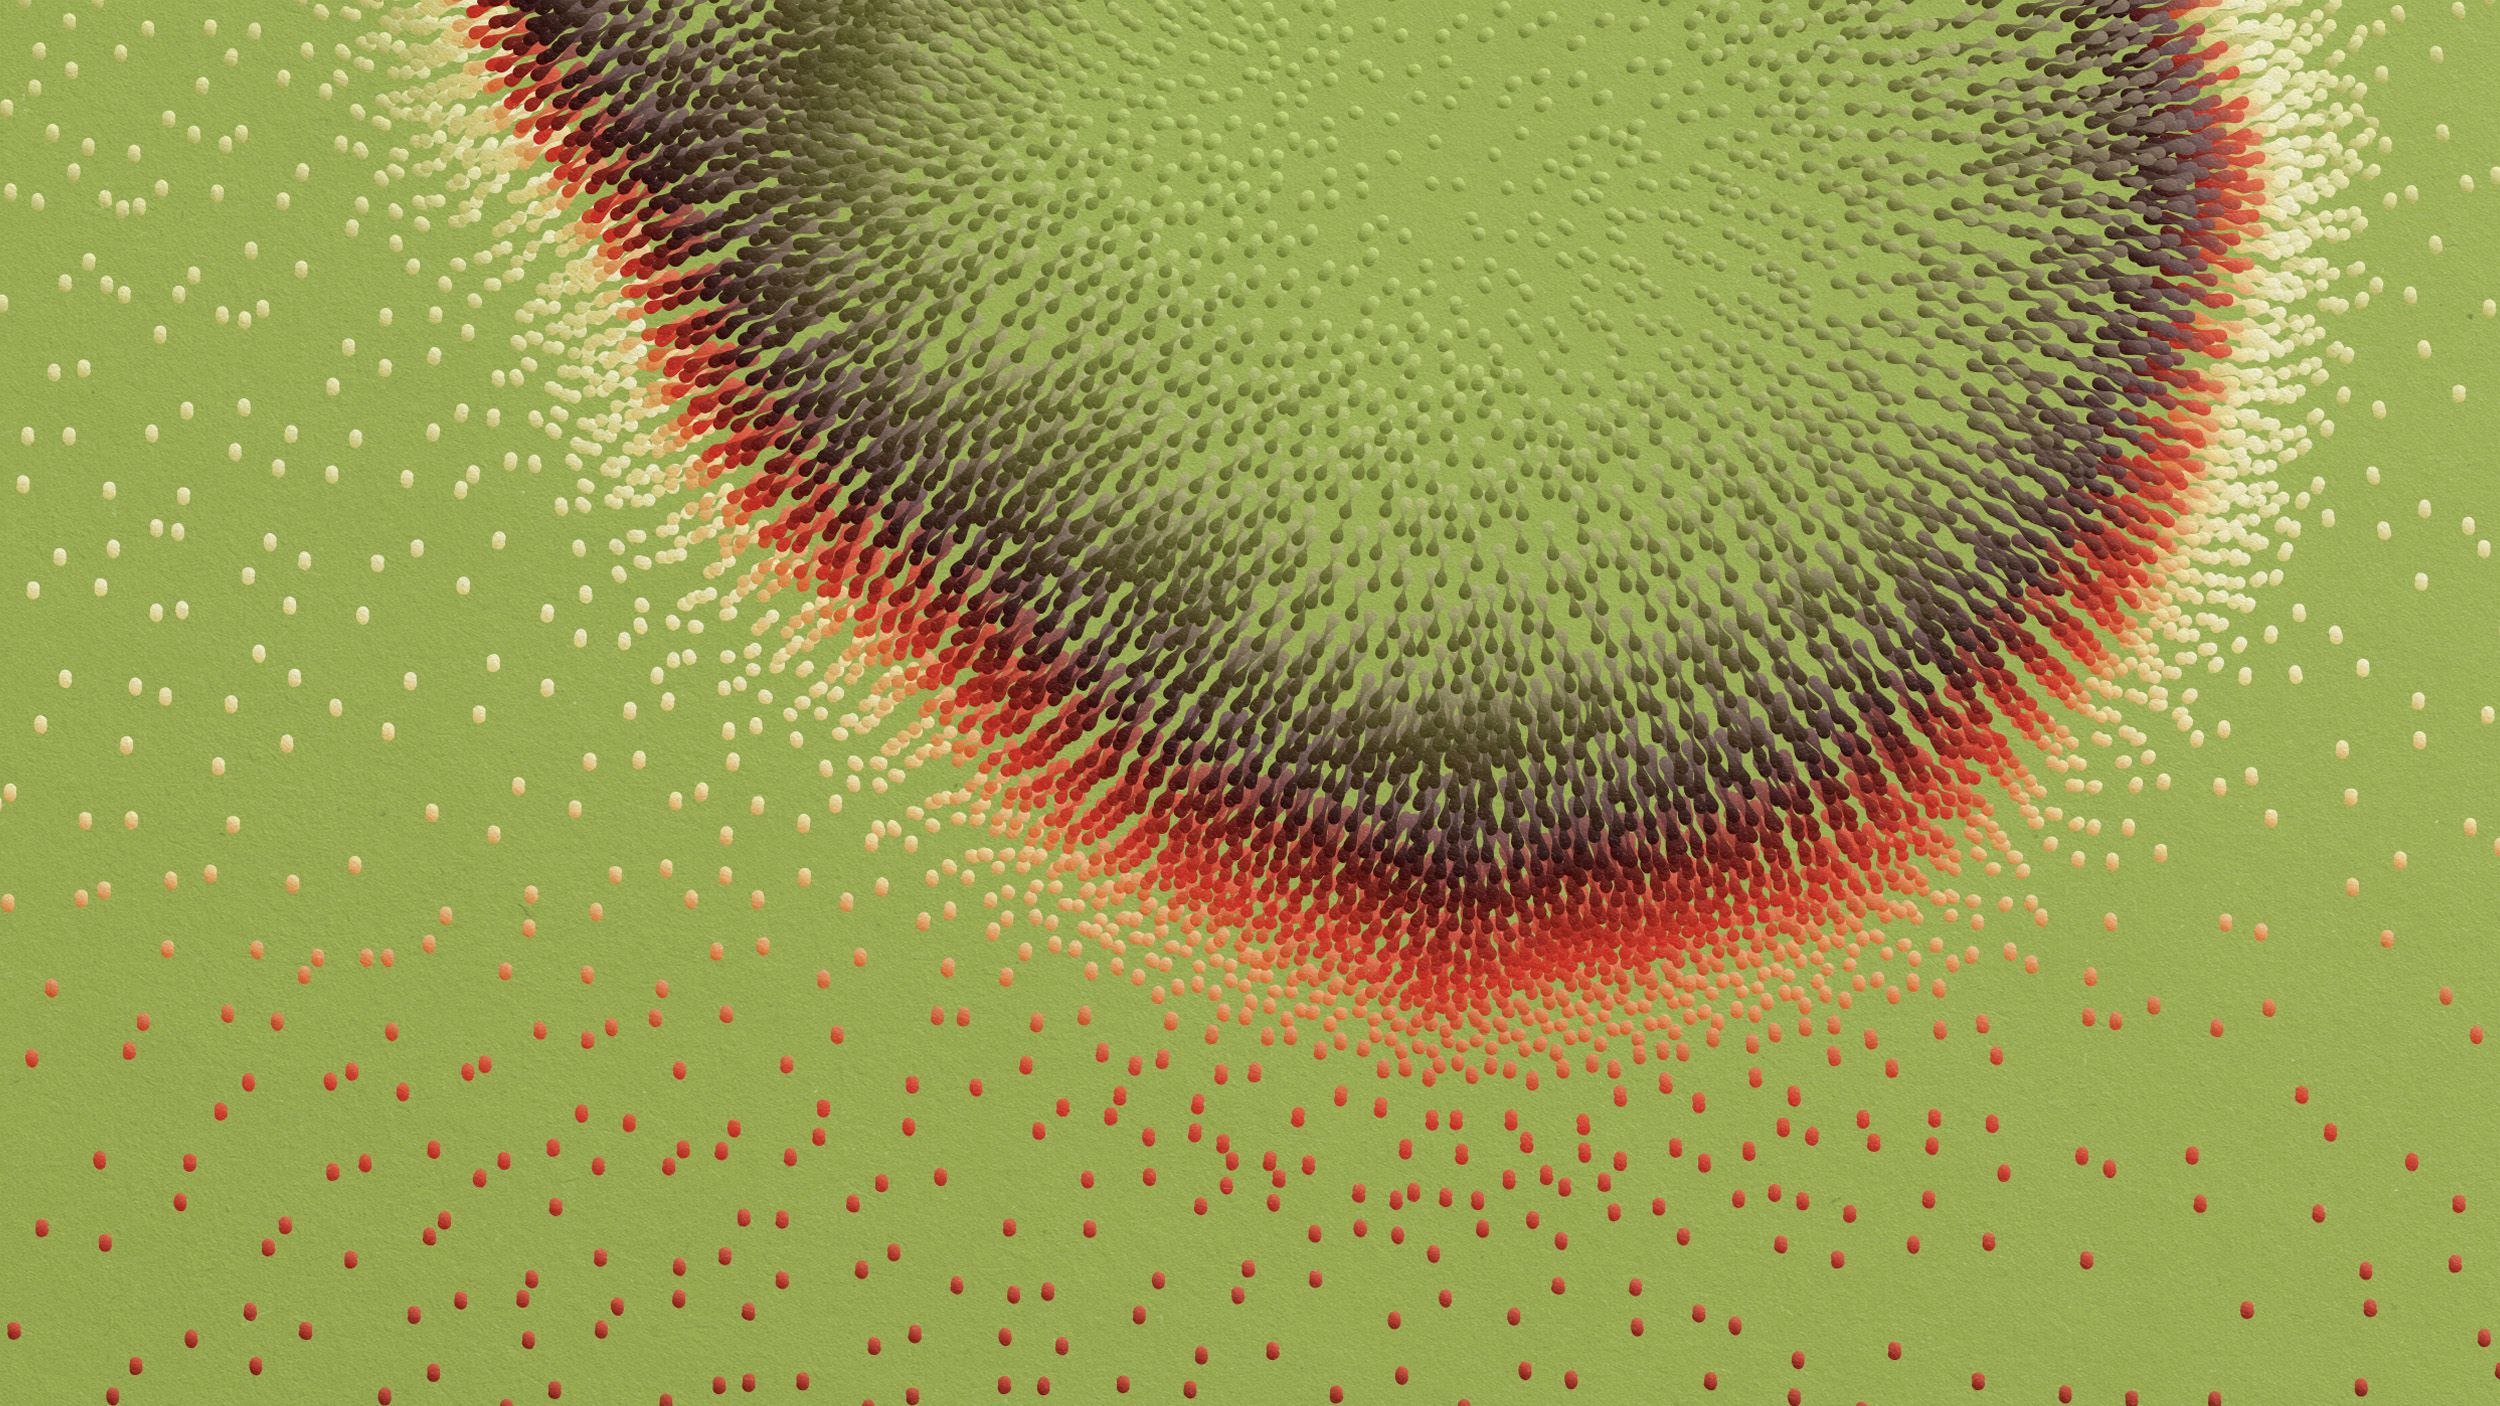 An image showcasing a quantum biology-inspired green, flower-like structure adorned with vibrant red dots.